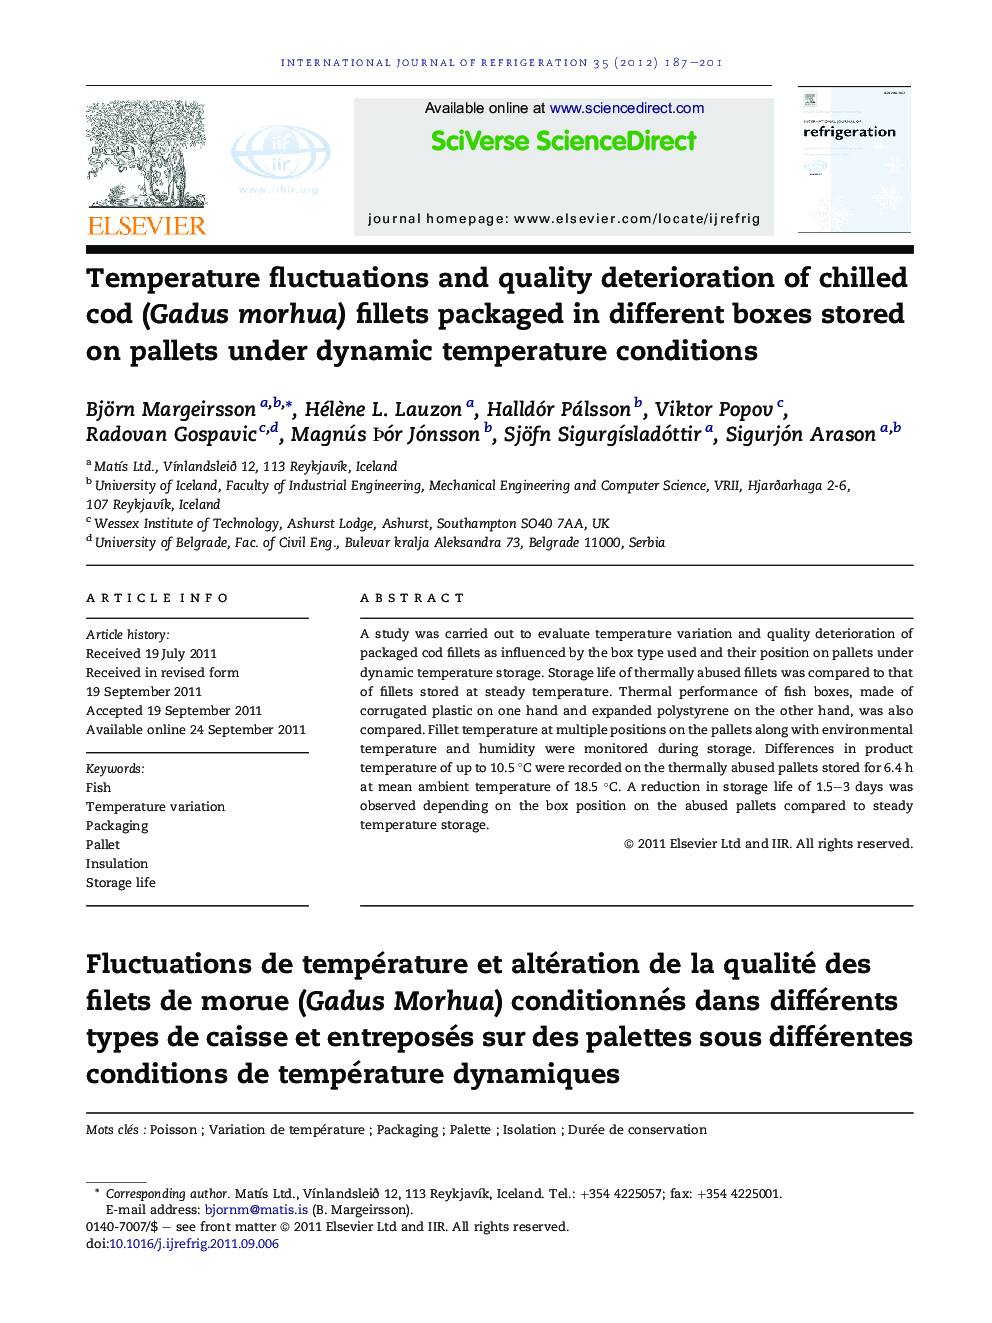 Temperature fluctuations and quality deterioration of chilled cod (Gadus morhua) fillets packaged in different boxes stored on pallets under dynamic temperature conditions